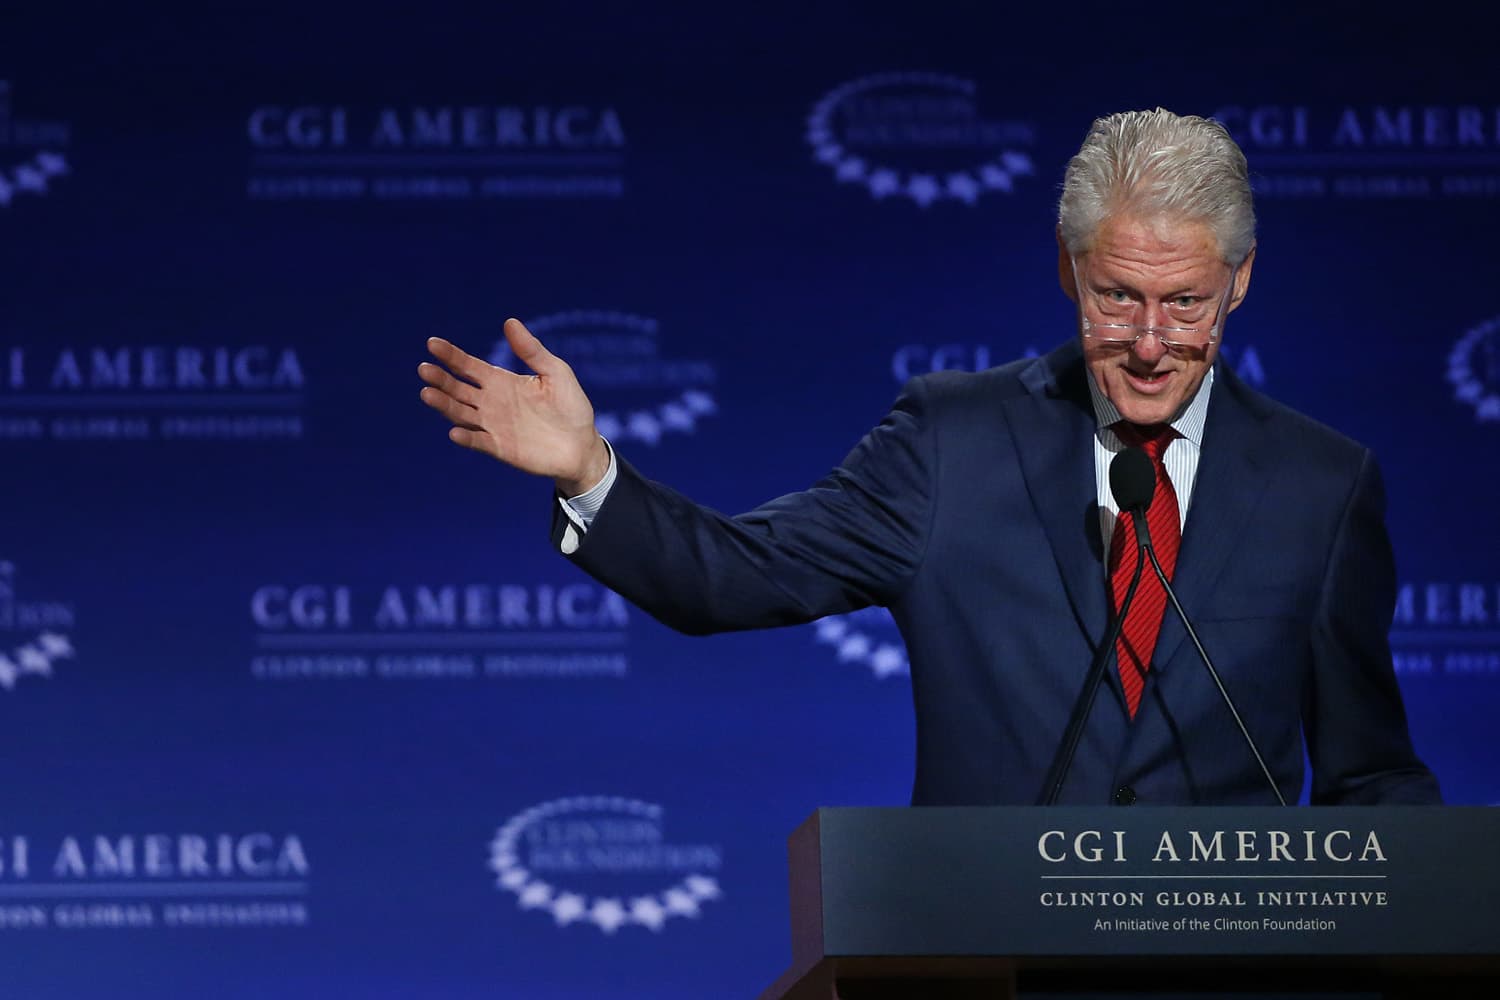  In this June 10, 2015 file photo, former U.S. President Bill Clinton speaks at annual gathering of the Clinton Global Initiative America, which is a part of The Clinton Foundation, in Denver. (Brennan Linsley/AP)